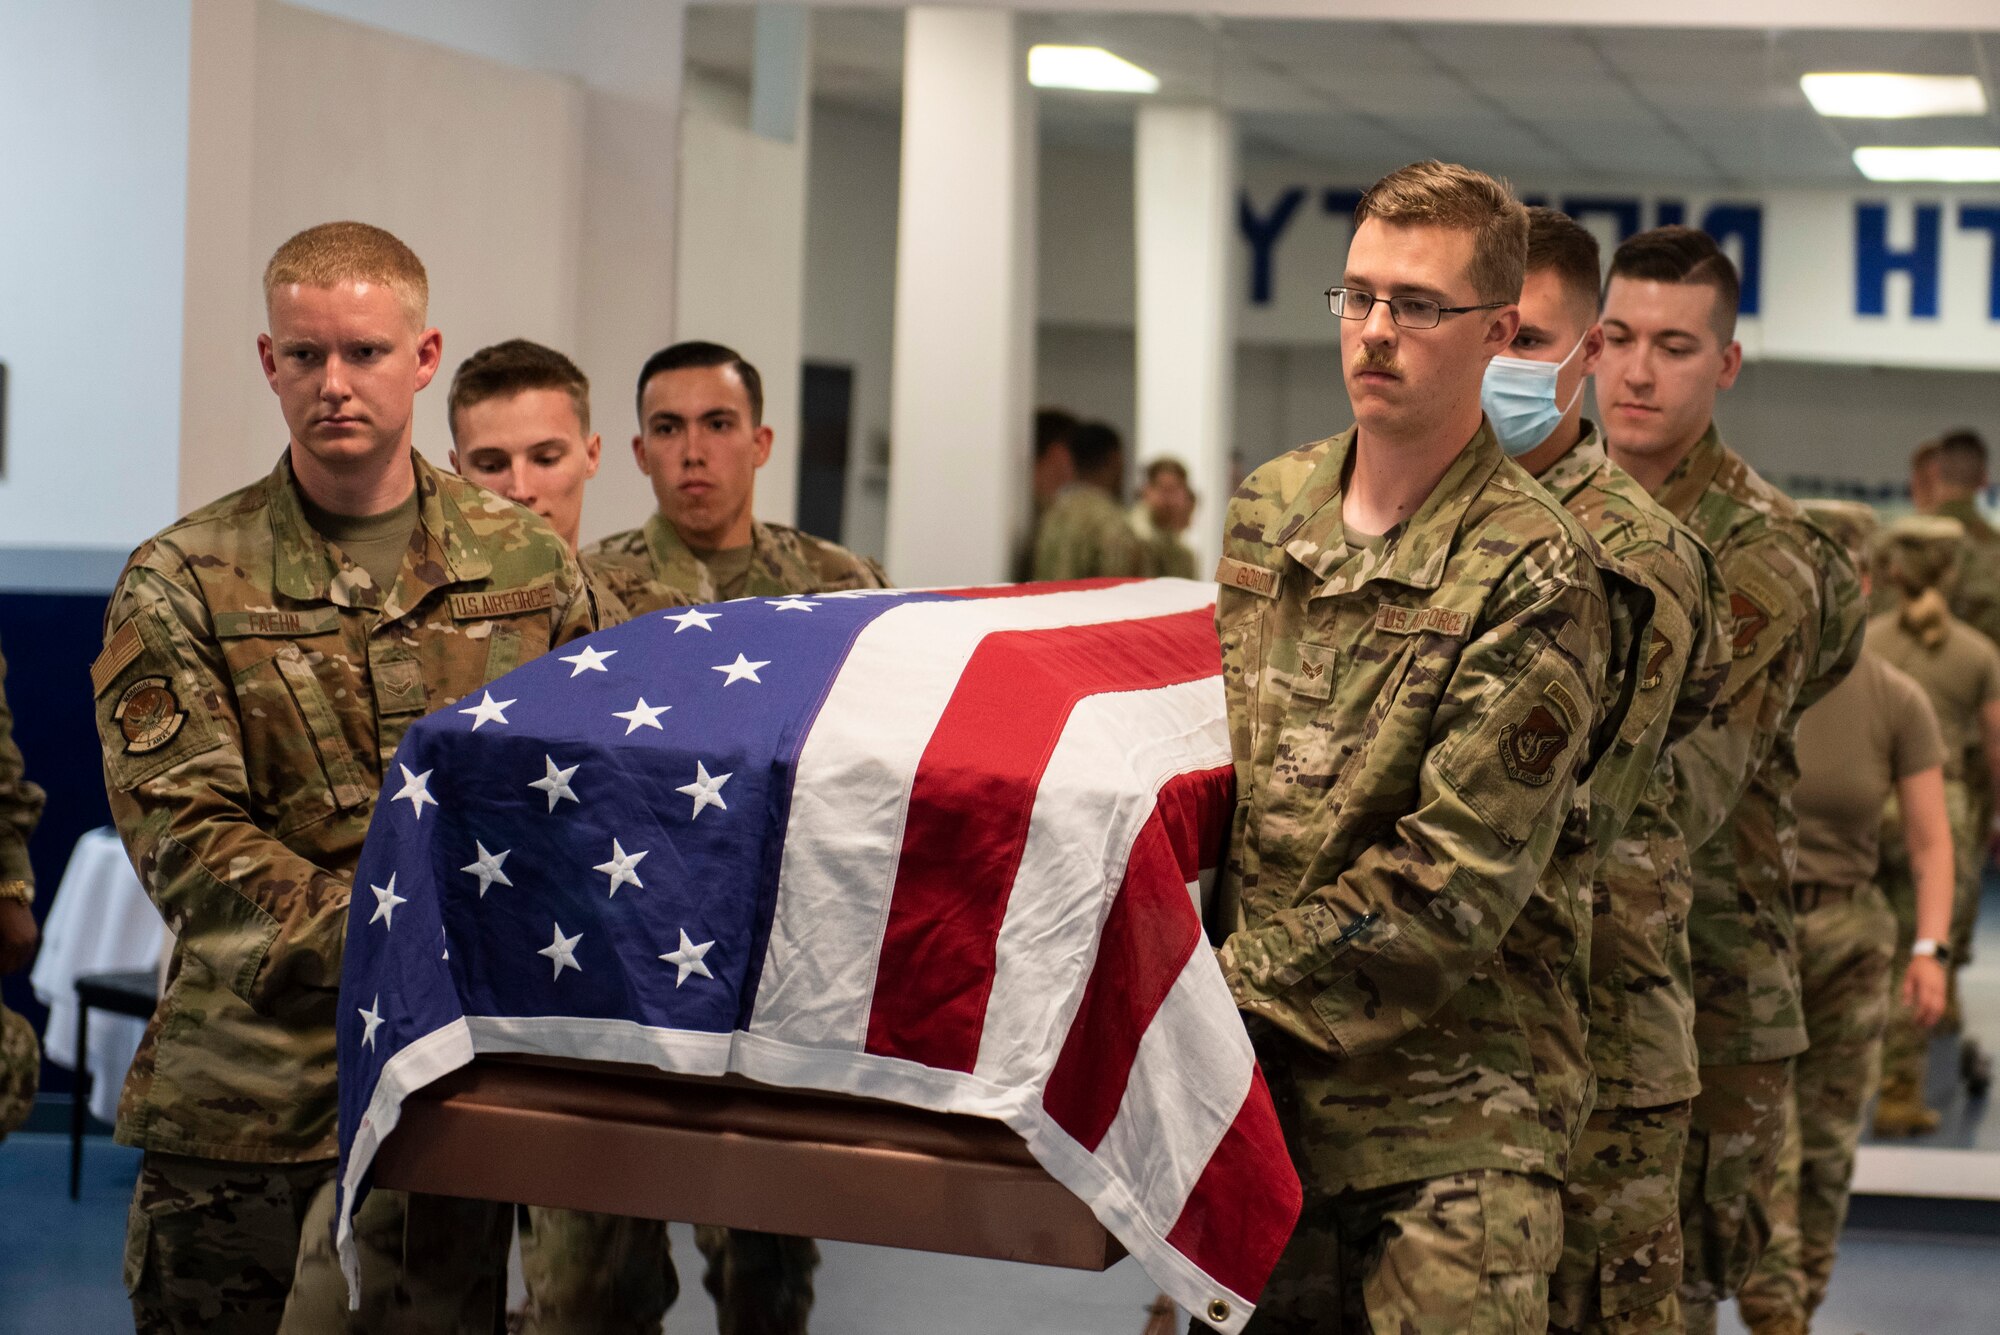 U.S. Airmen with the Joint Base Elmendorf-Richardson Honor Guard demonstrate how to carry a casket during an Honor Guard Open House at JBER, Alaska, July 19, 2021. The Honor Guard hosted the event to encourage Airmen to participate in the Honor Guard program. (U.S. Air Force photo by Senior Airman Emily Farnsworth)